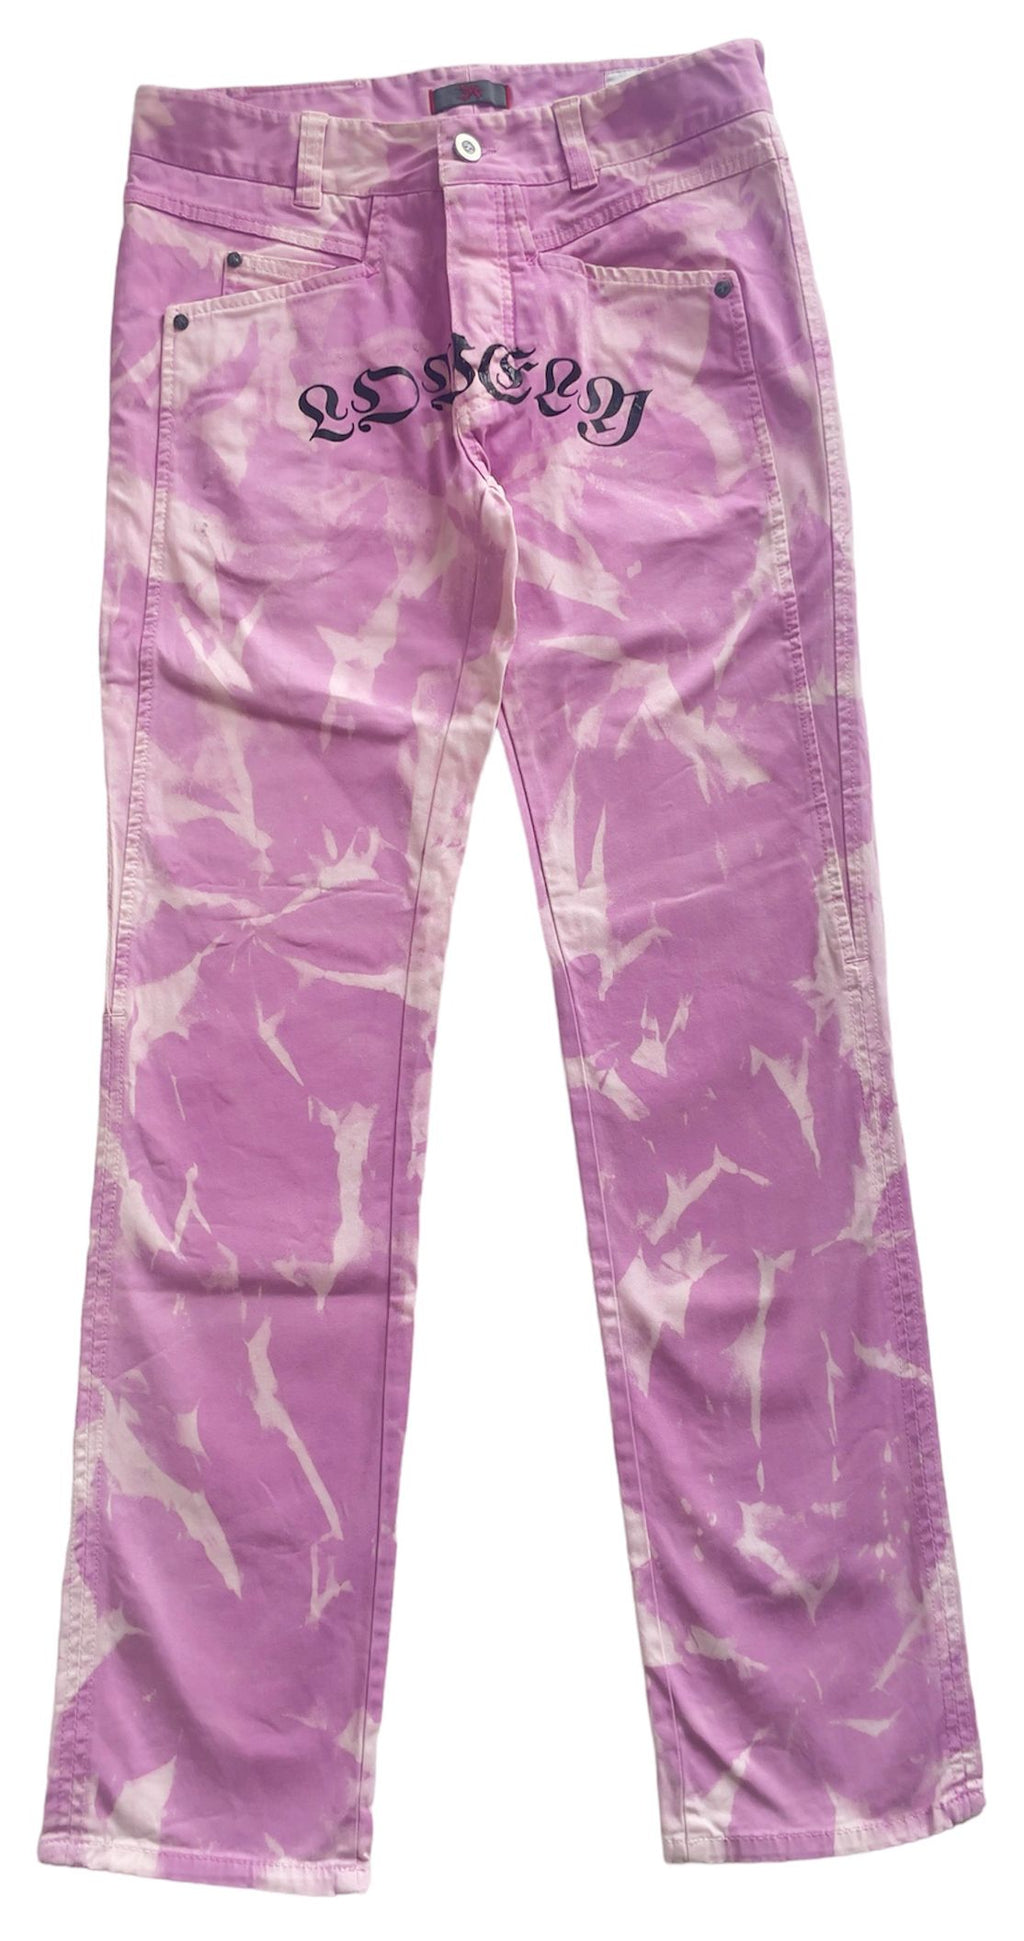  Lovely Death Dreams Jeans 6 Rose Rosa Uomo - 1